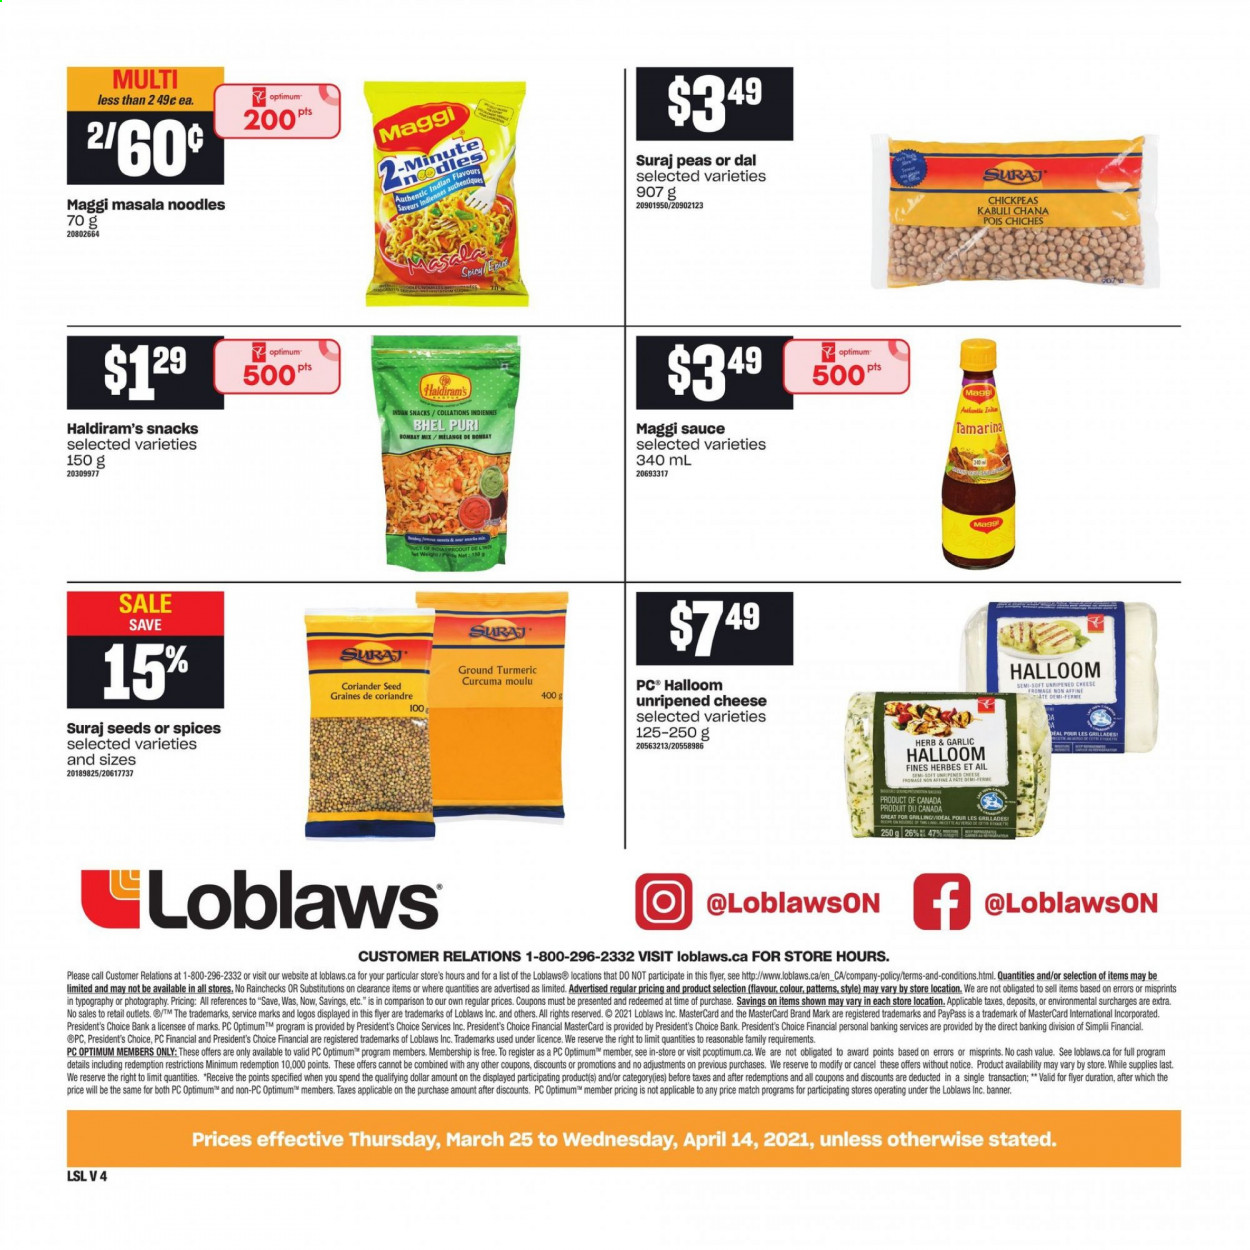 thumbnail - Loblaws Flyer - March 25, 2021 - April 14, 2021 - Sales products - peas, instant noodles, sauce, noodles, cheese, Président, snack, Maggi, chickpeas, turmeric, herbs, coriander, Optimum. Page 4.